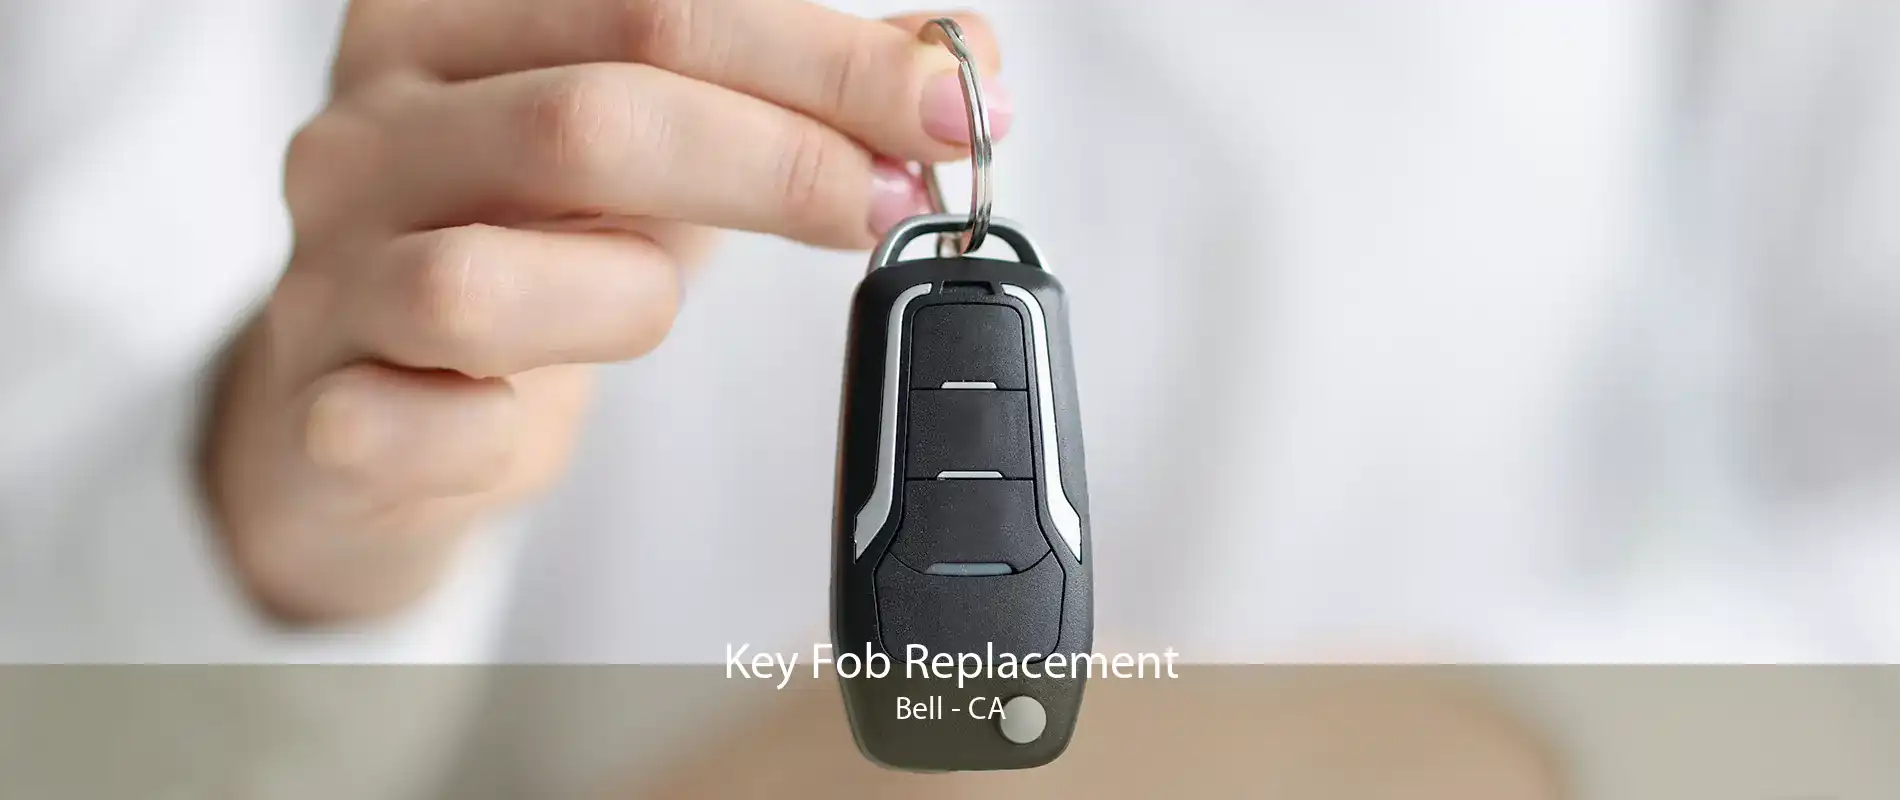 Key Fob Replacement Bell - CA